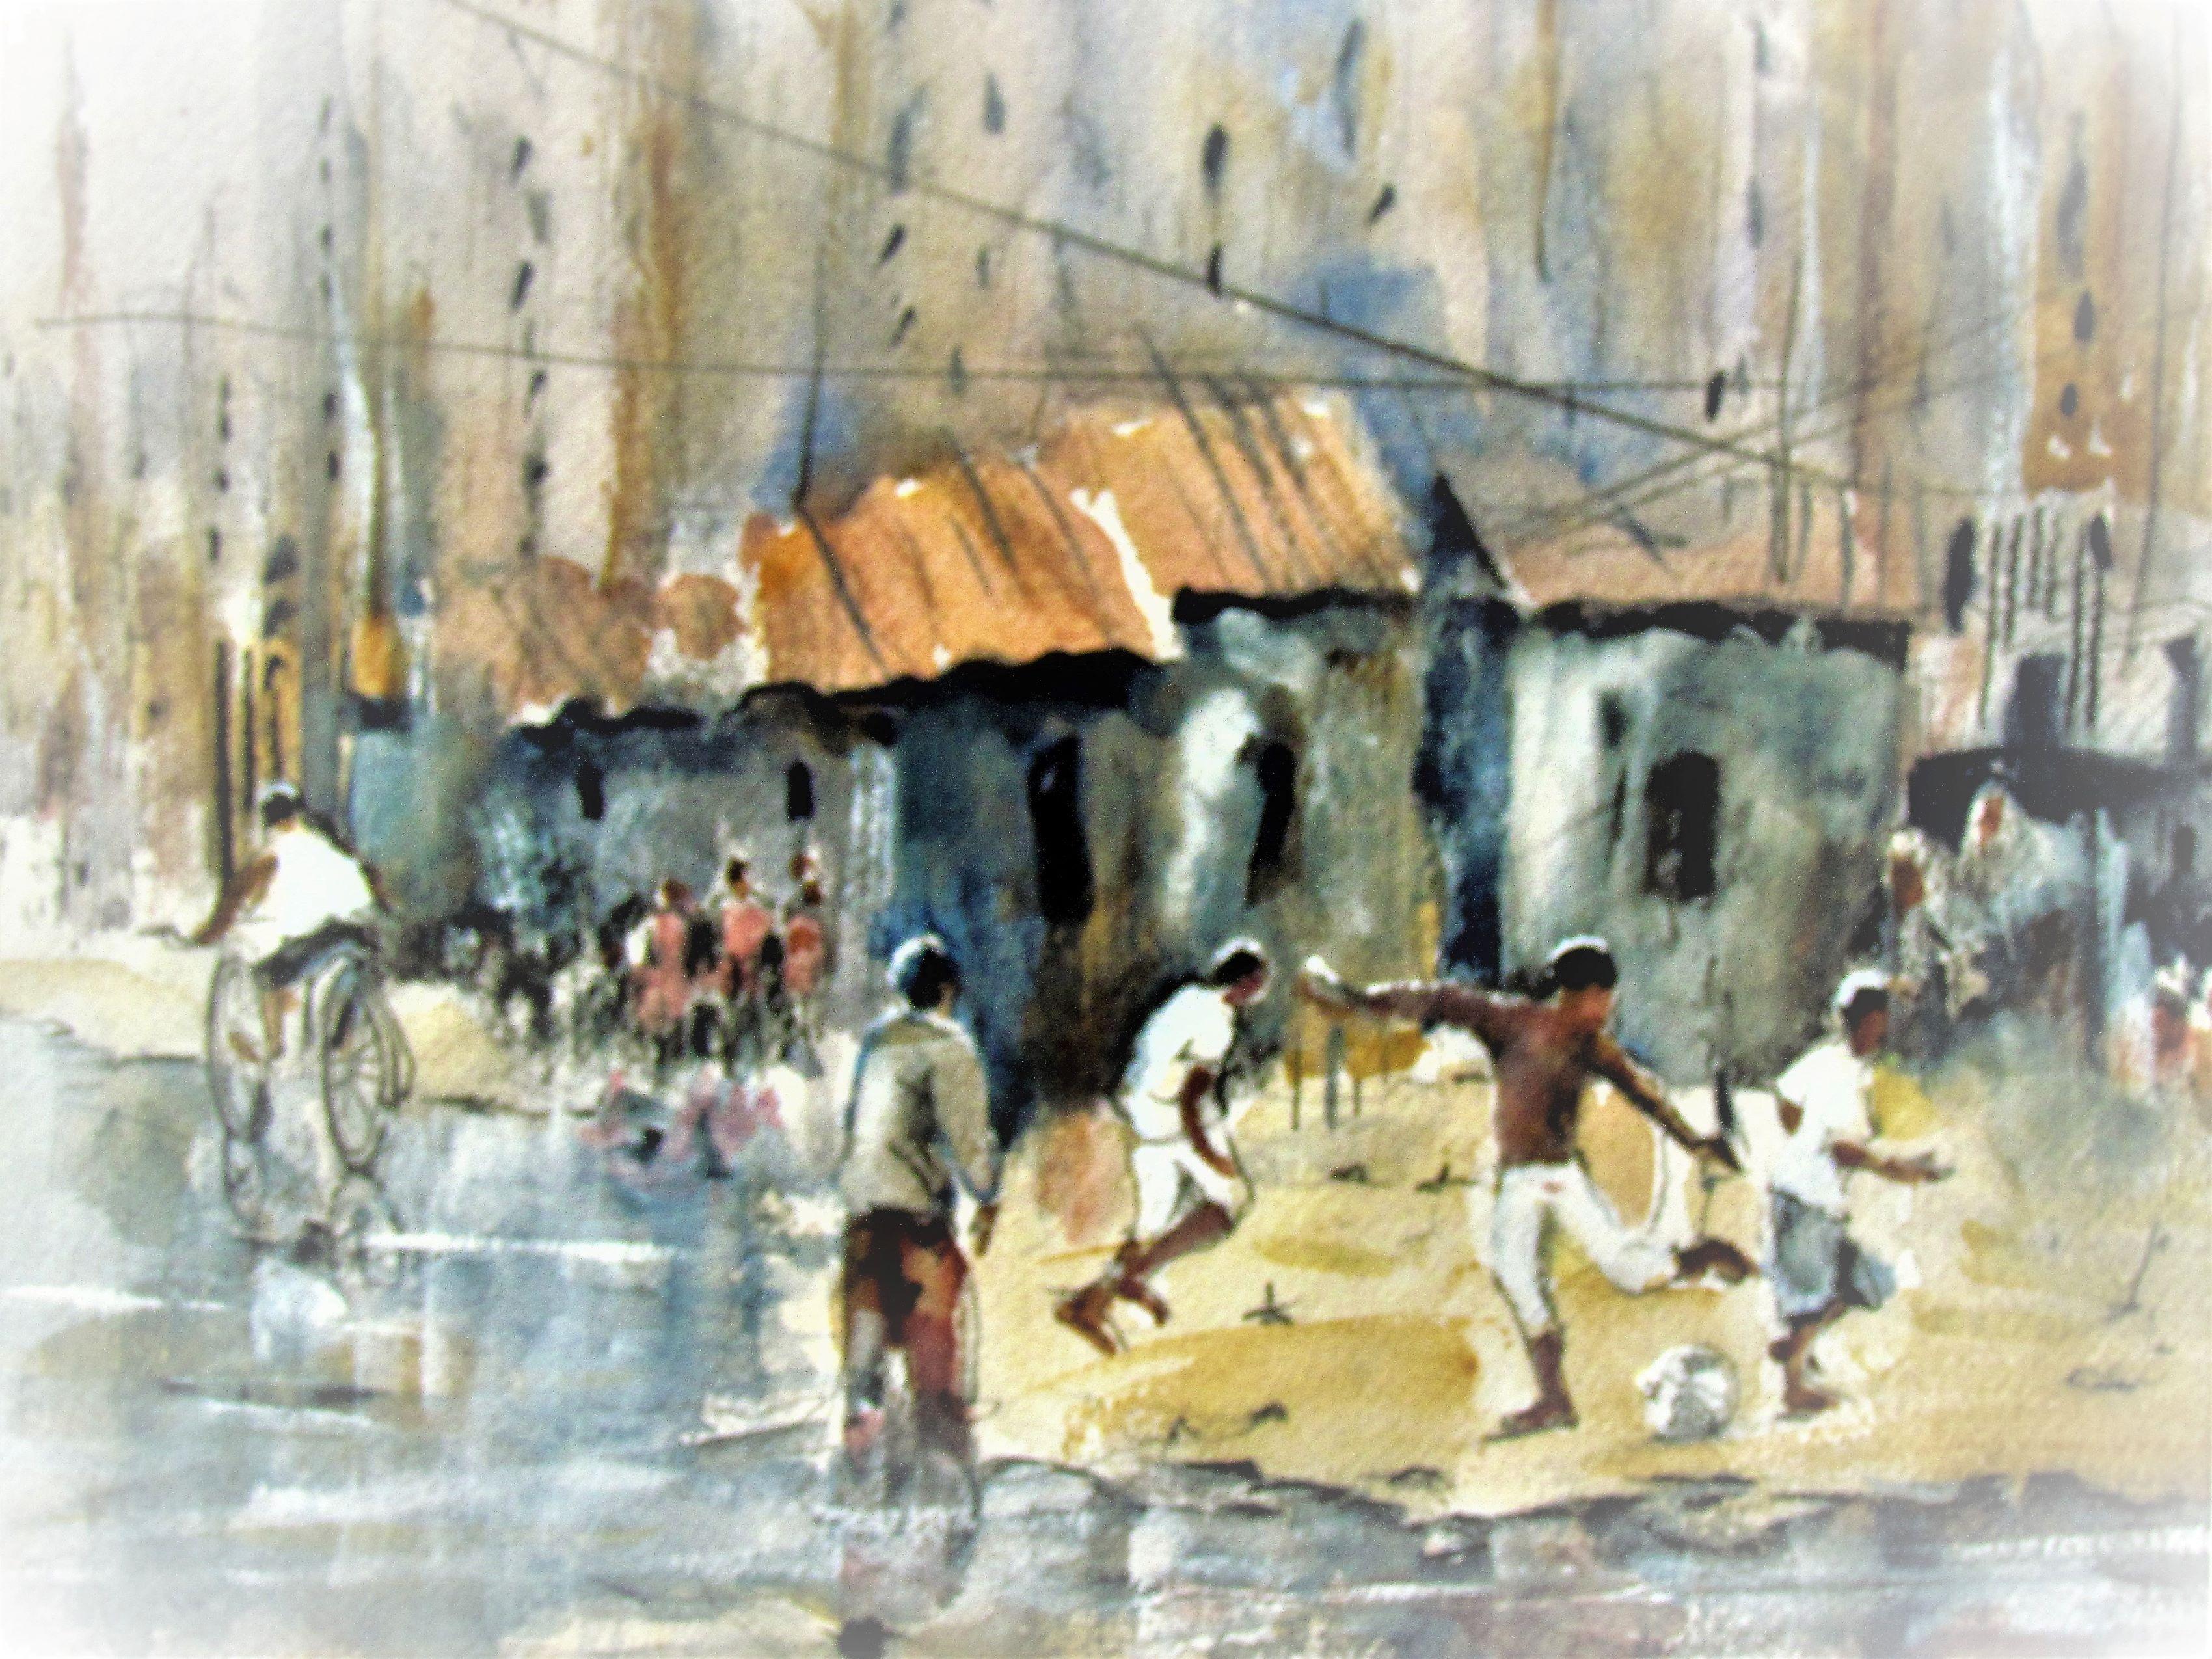 Soweto soccer match, Painting, Watercolor on Paper - Art by William Webster